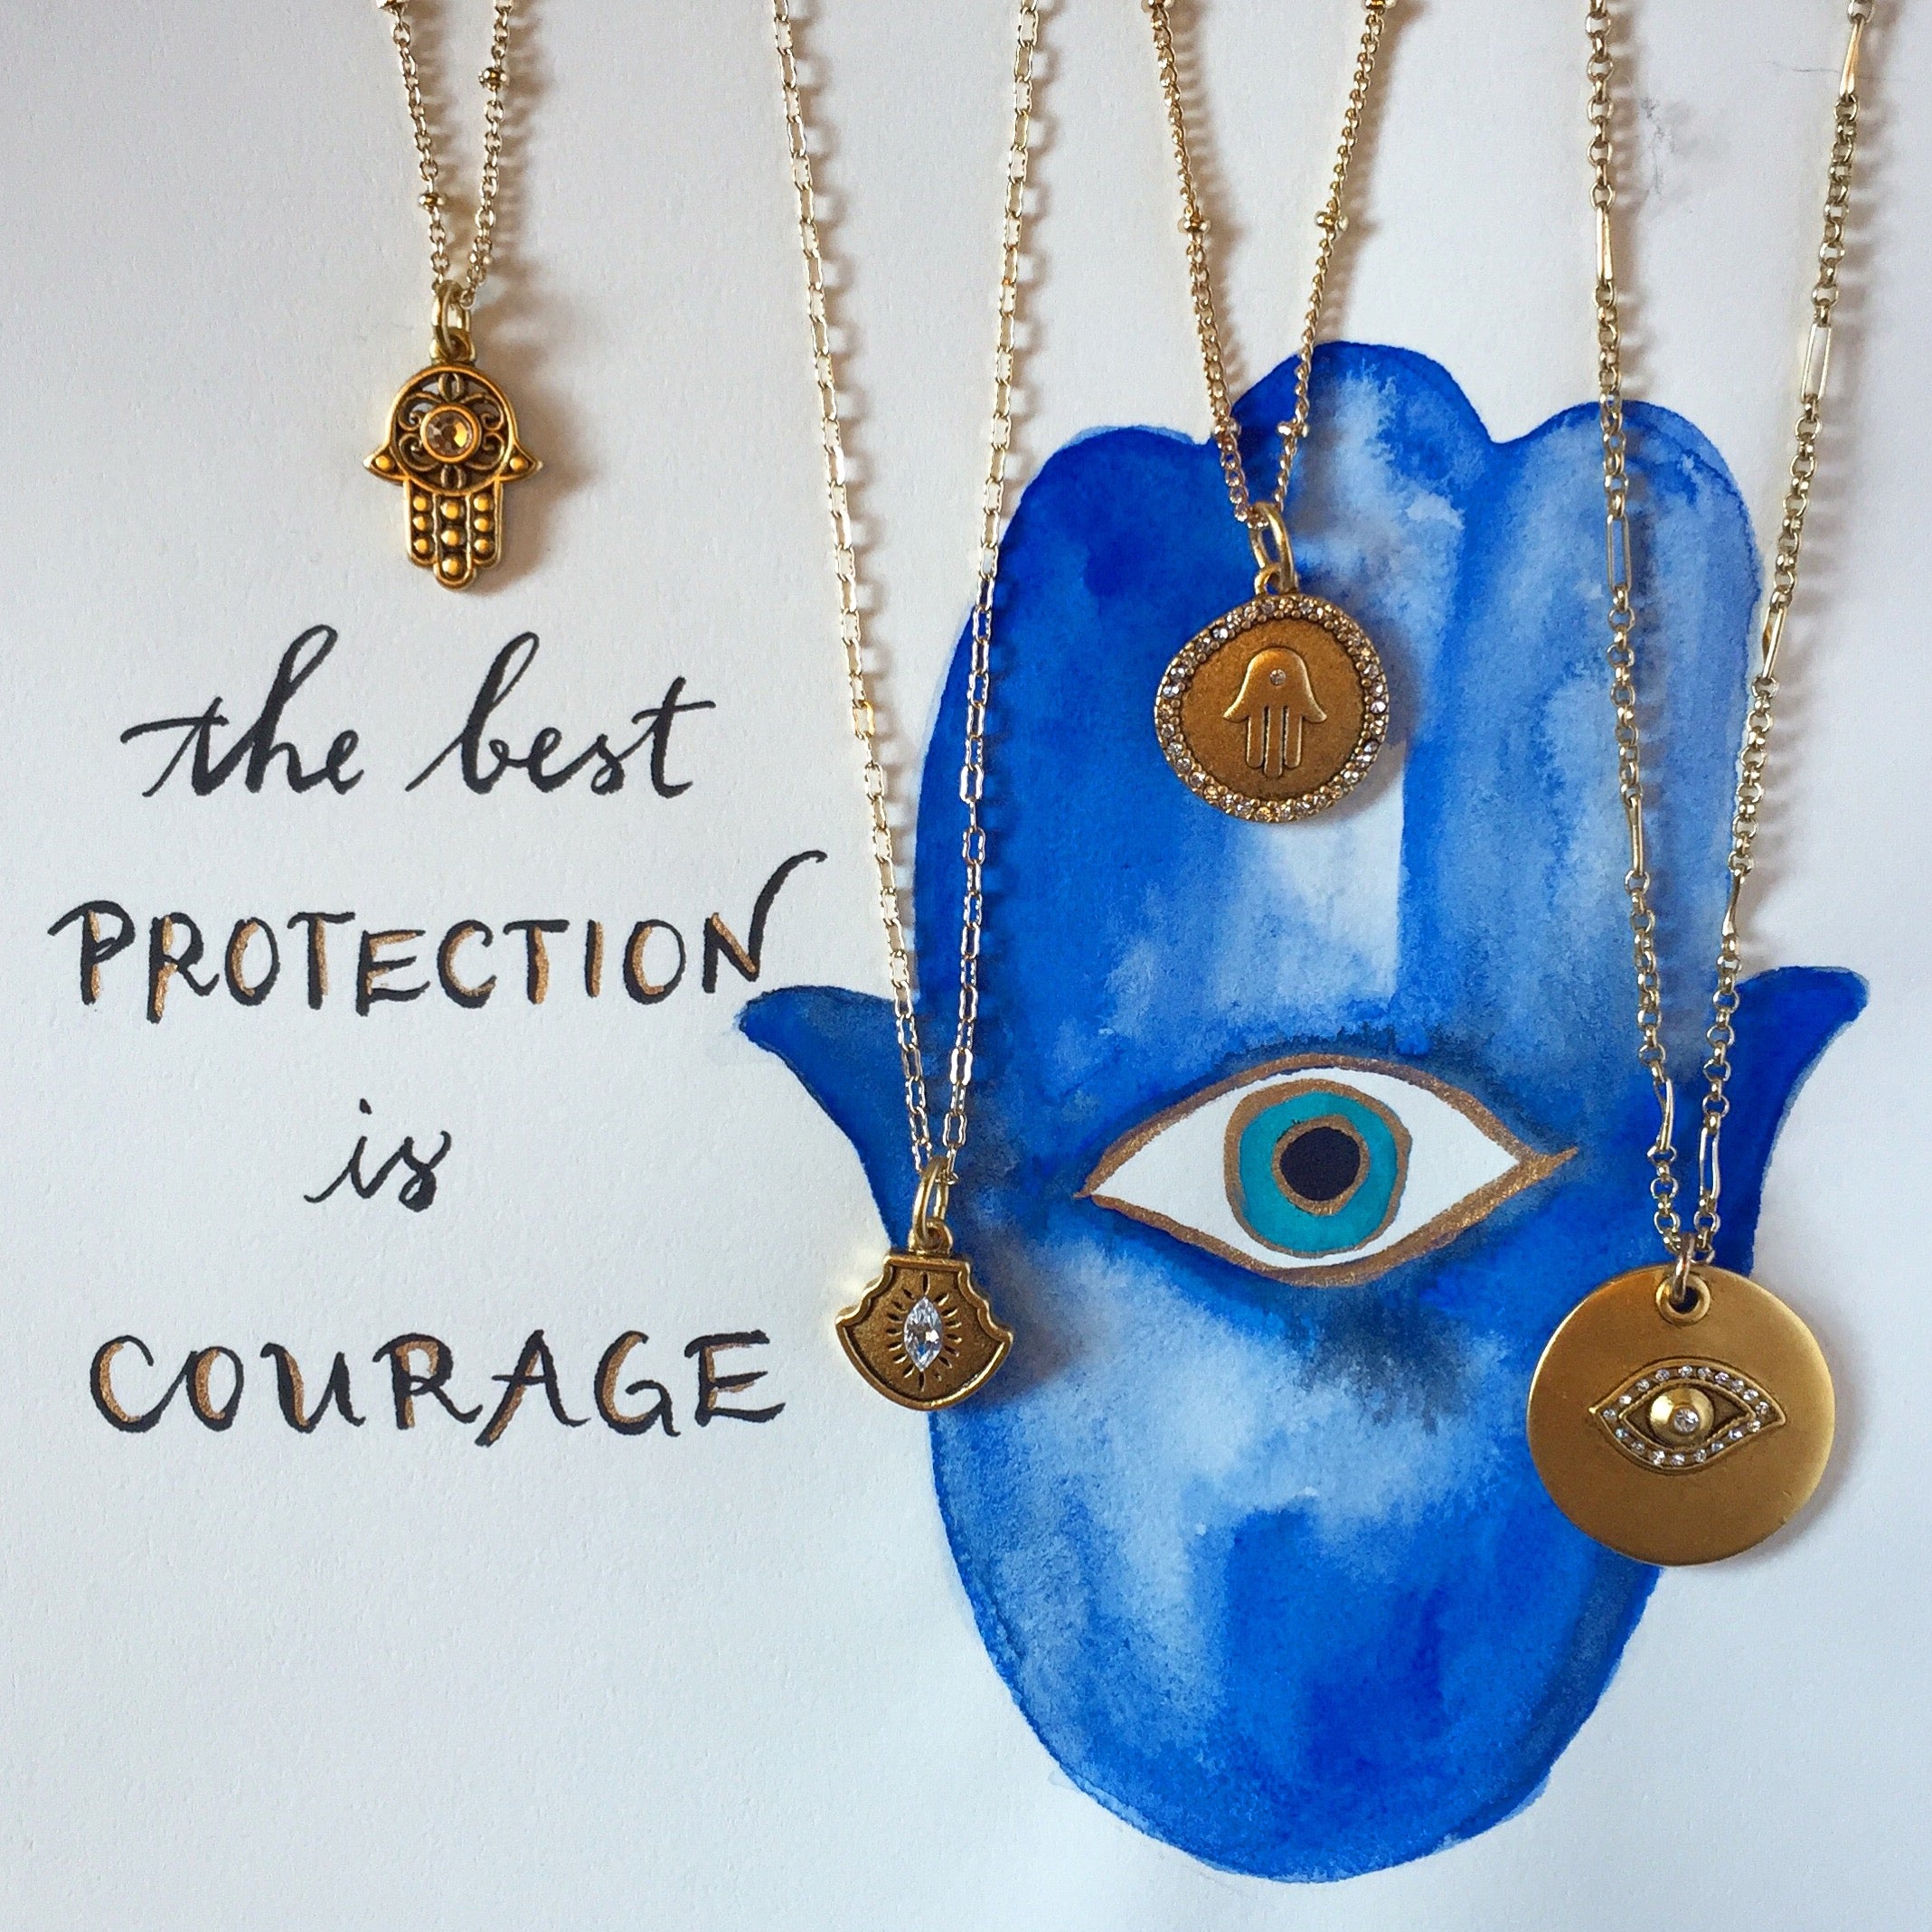 #SequinSayings - Courage is the Best Protection